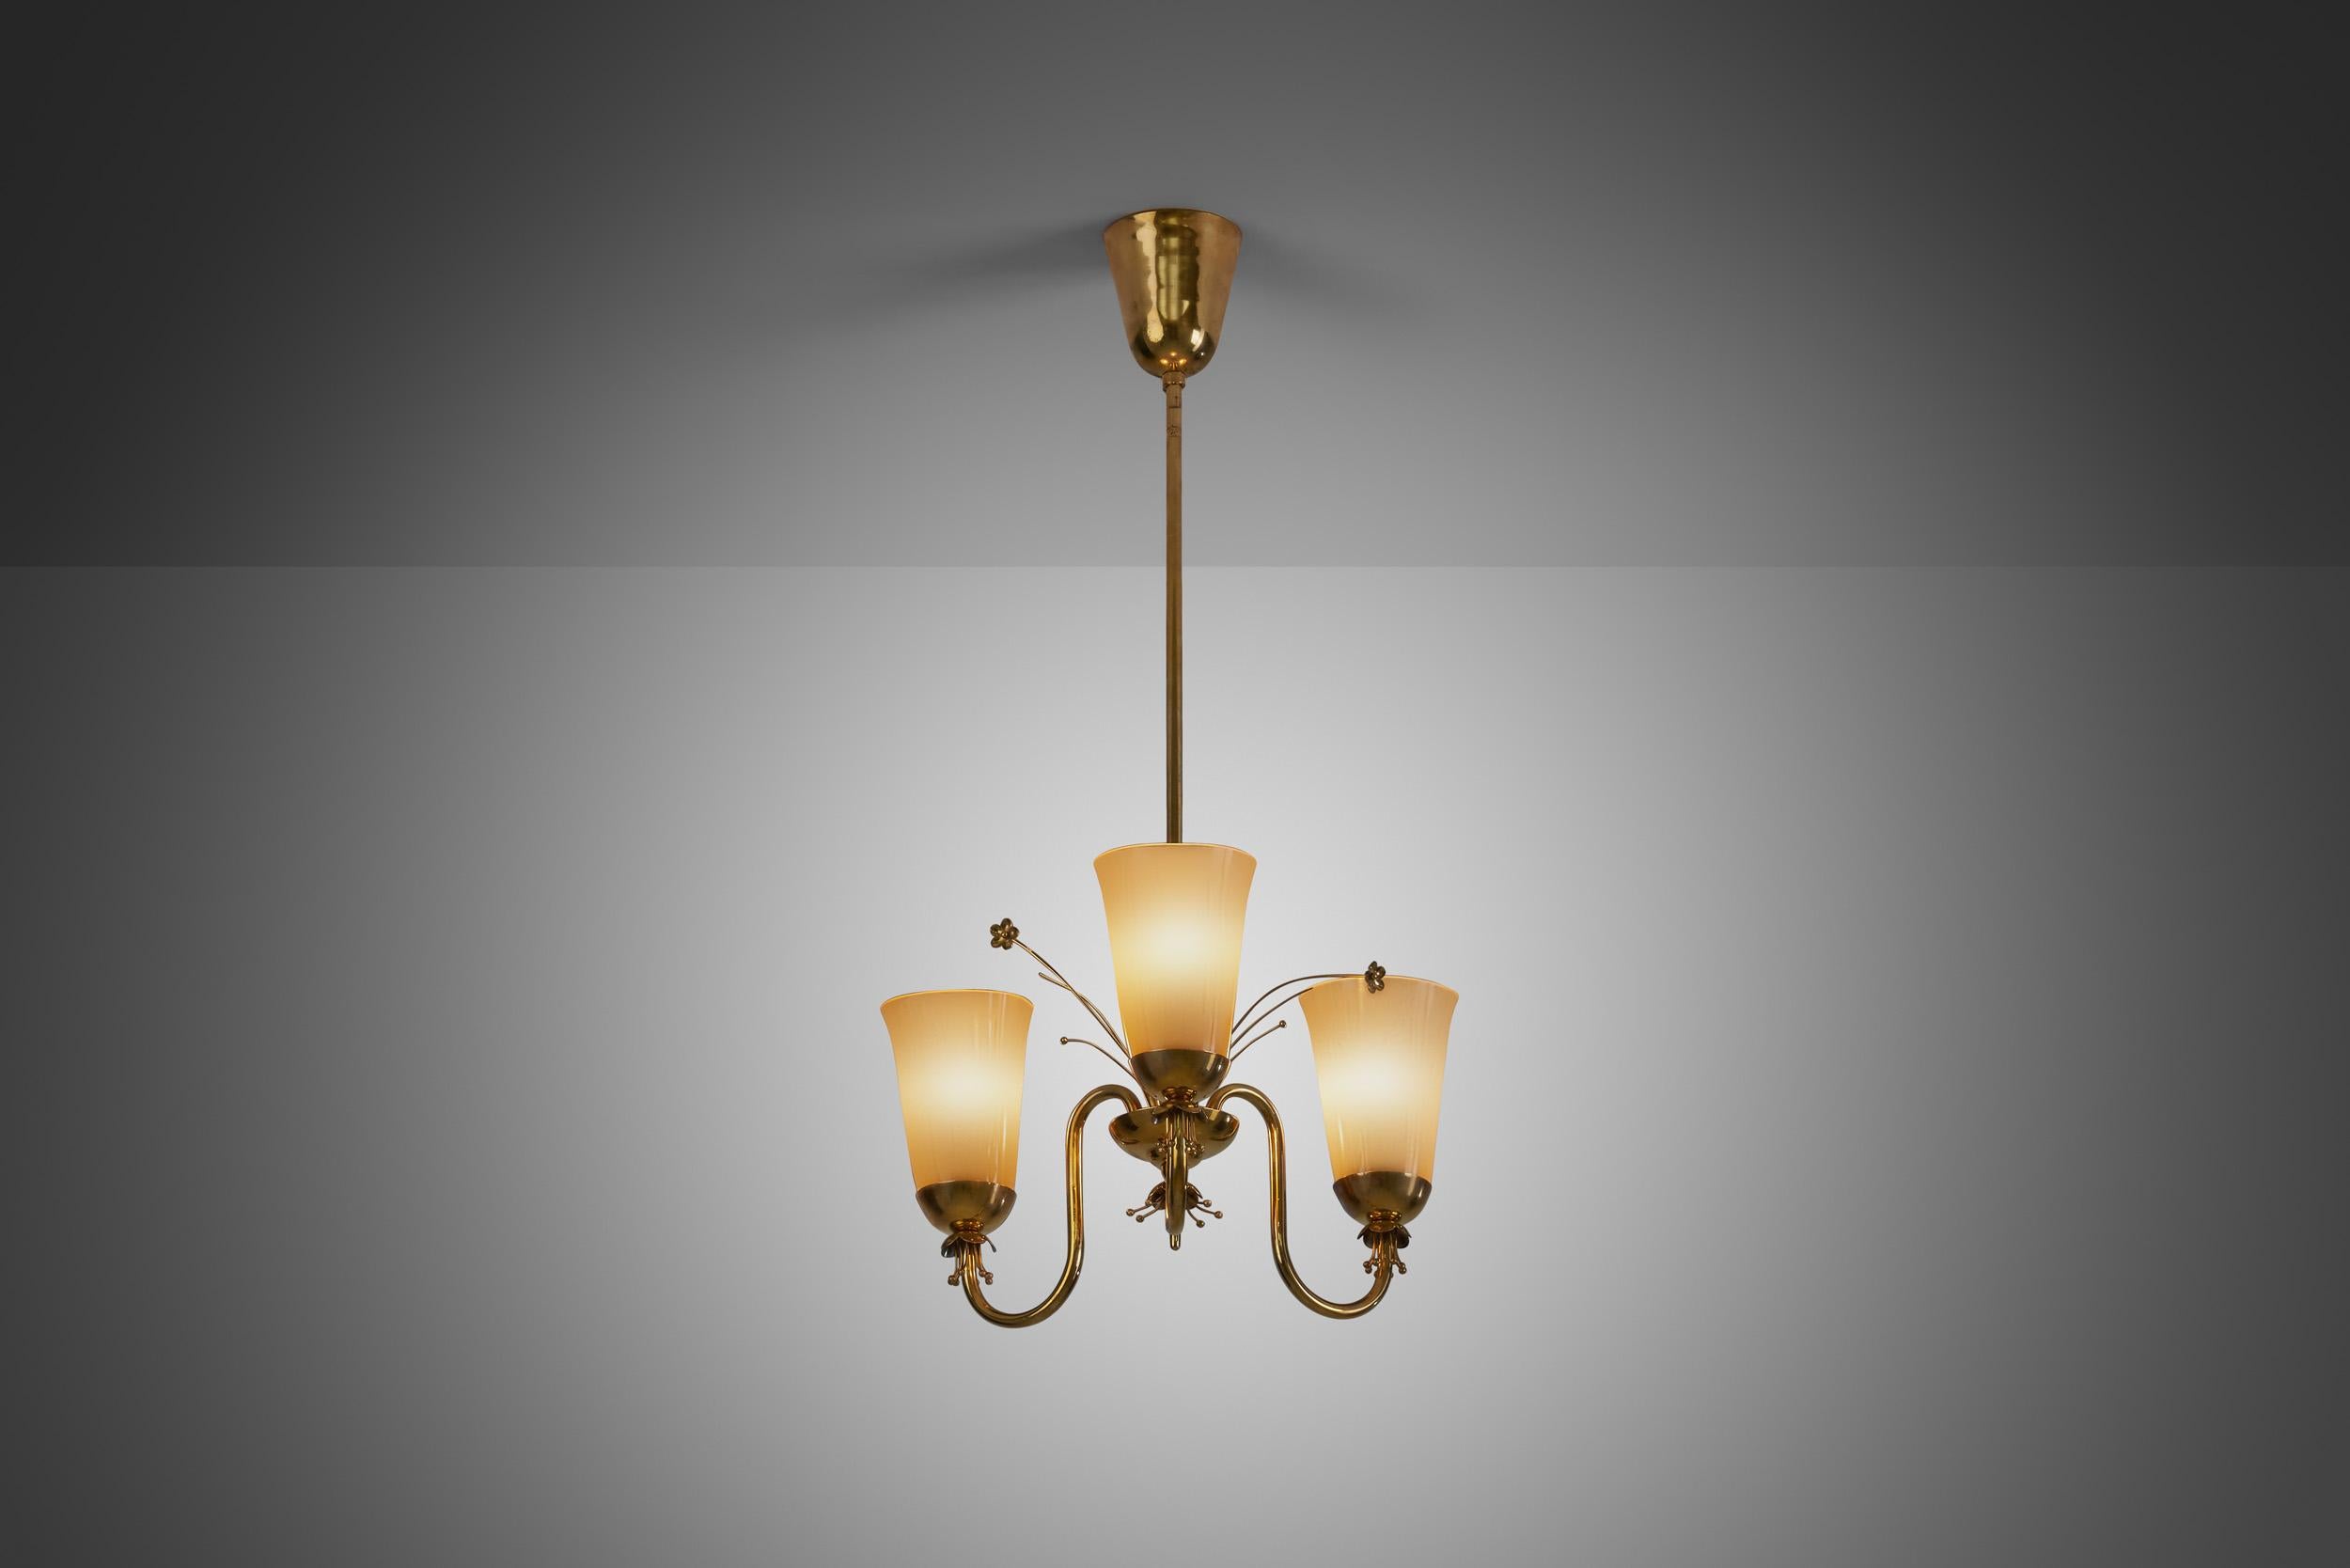 Mid-20th Century Brass Chandelier with Floral Decoration for Idman Oy, Finland, circa 1950s For Sale